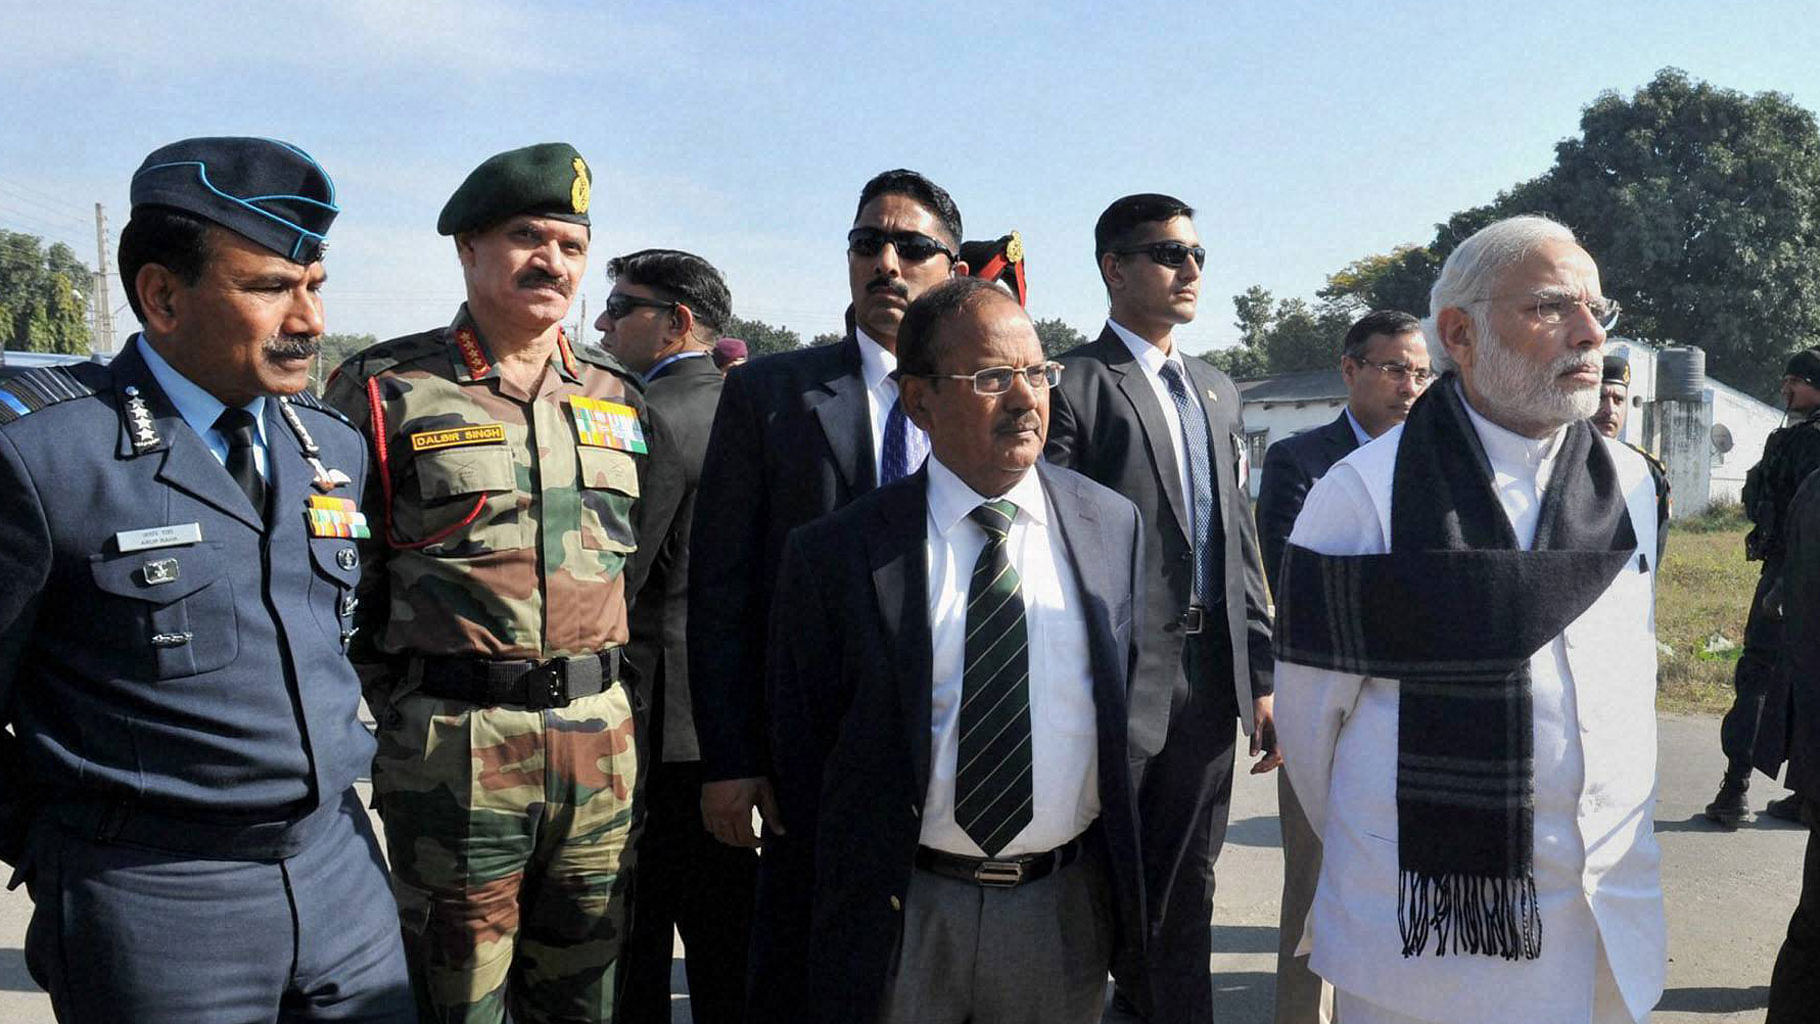 Narendra Modi and National Security Adviser Ajit Doval watching a presentation on counter-terrorism and combing operation at Pathankot Airbase.&nbsp;